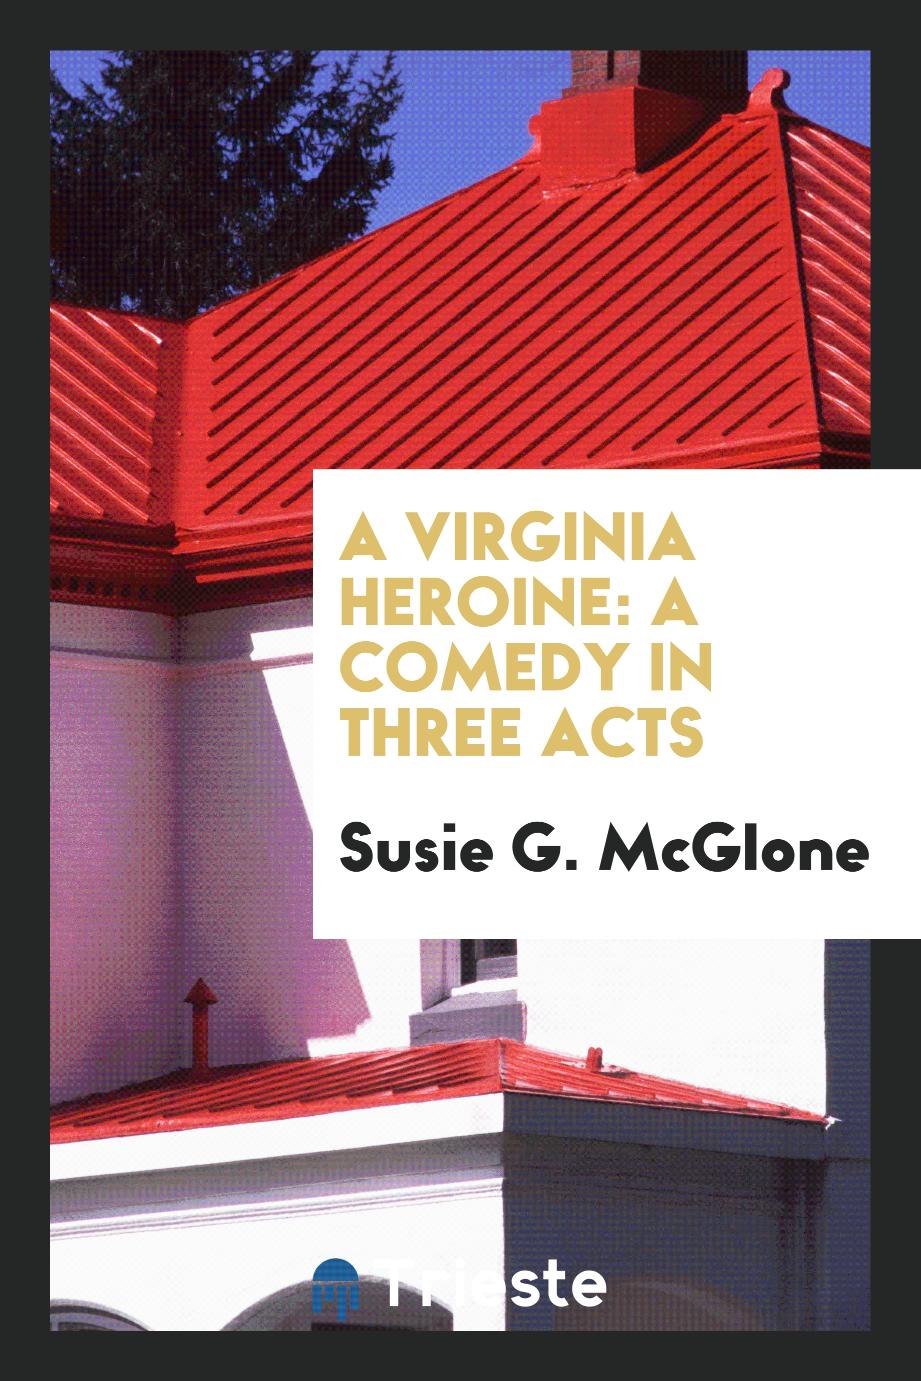 A Virginia Heroine: A Comedy in Three Acts